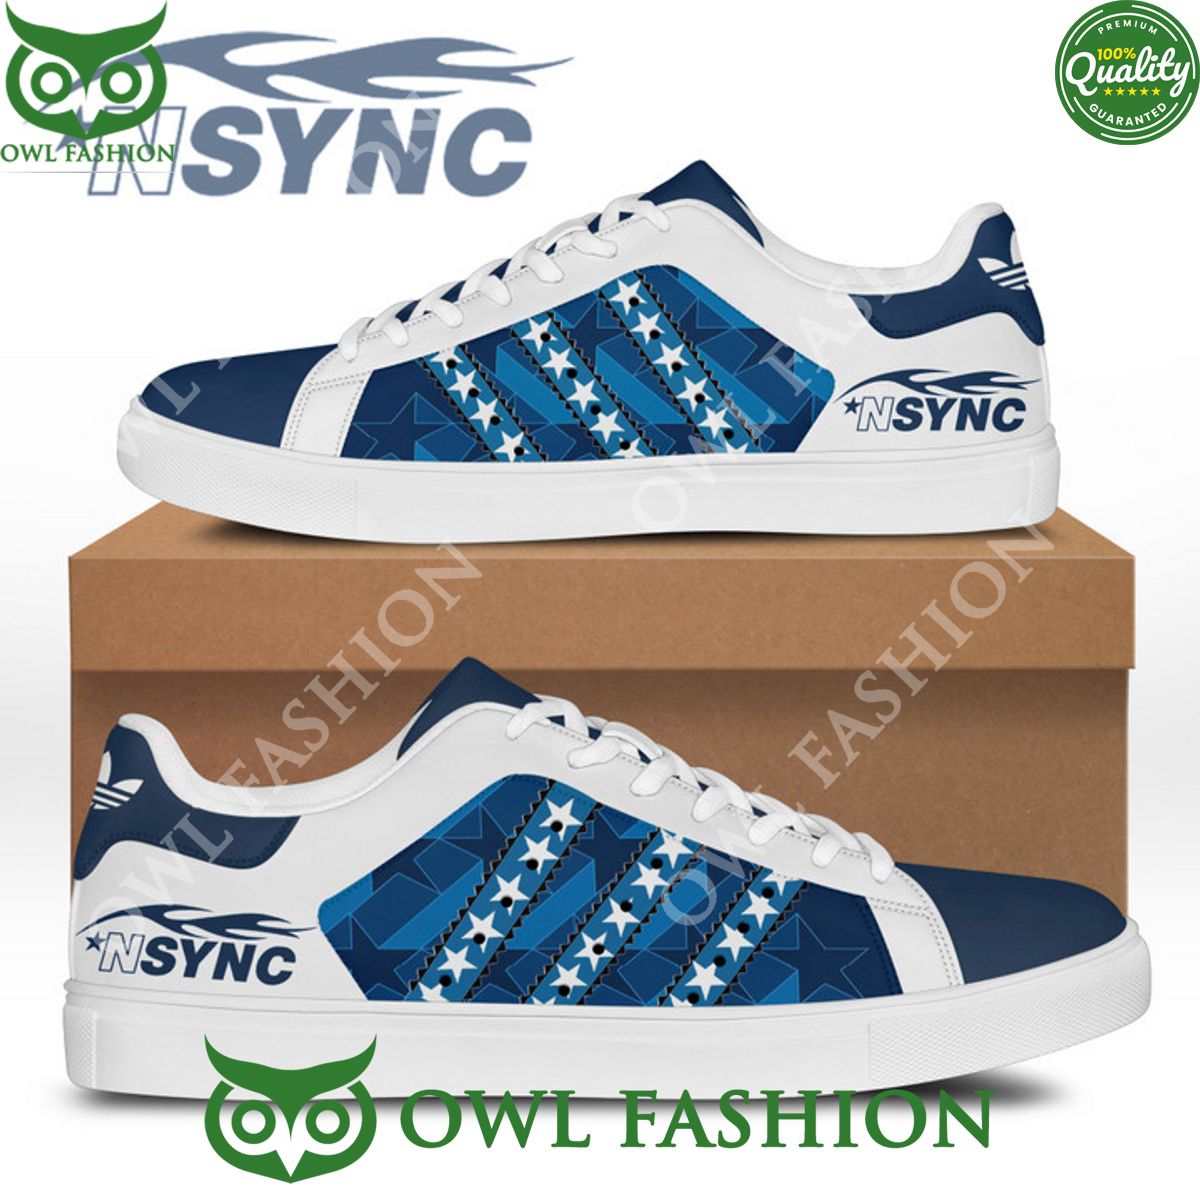 Nysnc American vocal group stan smith shoes